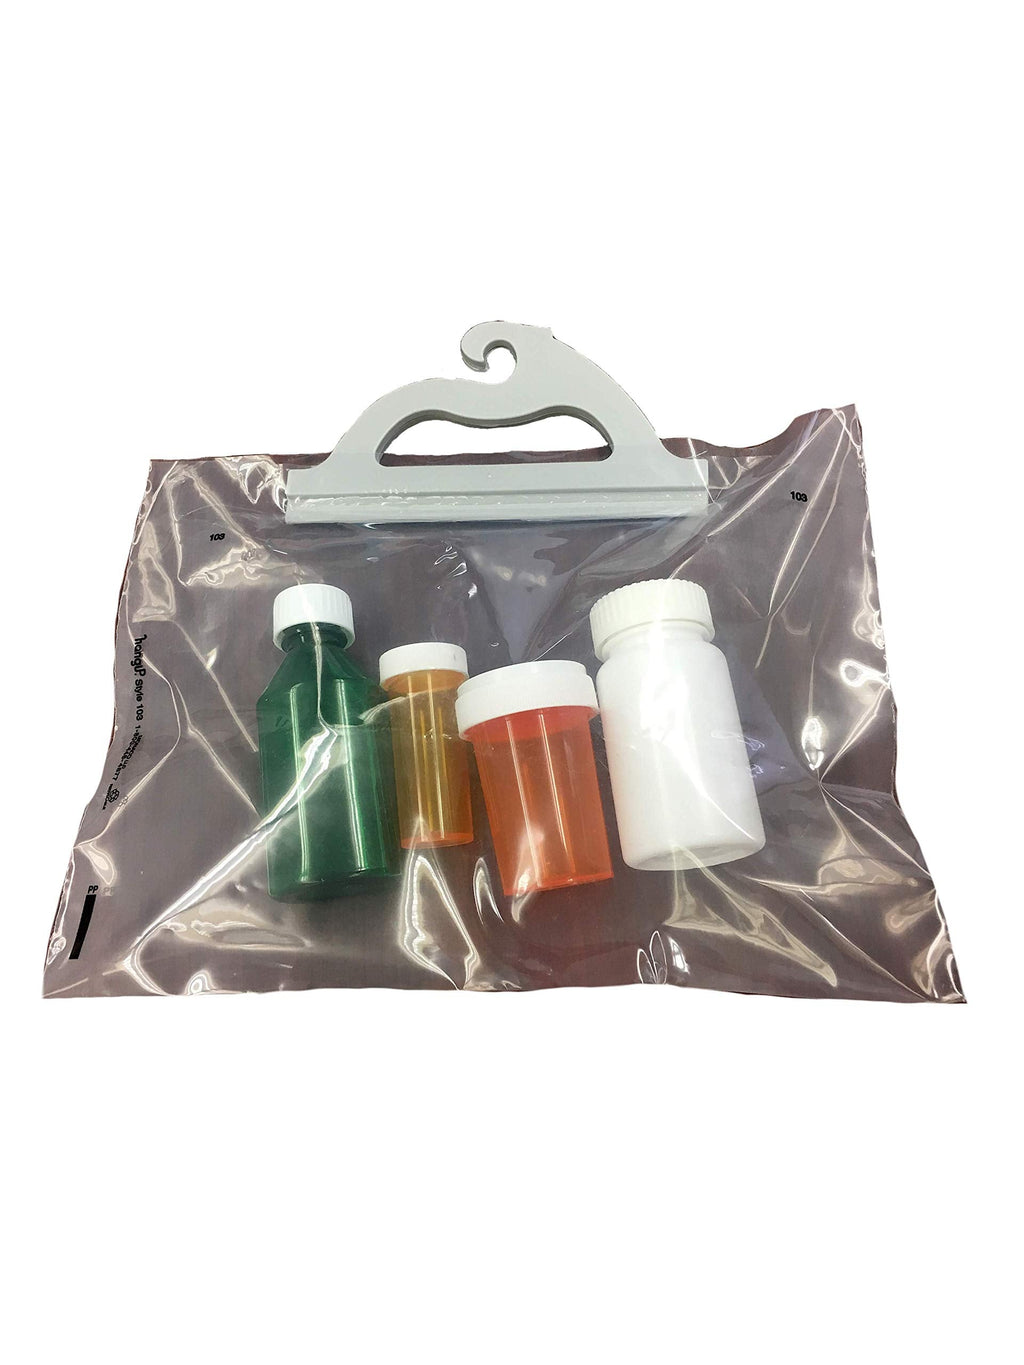  [AUSTRALIA] - Hangup Deluxe Storage Bag - 14 x 12.5 inches - Clear with White Handle - Pack of 5 by AmexDrug (Hanging Storage Bag, Portable)